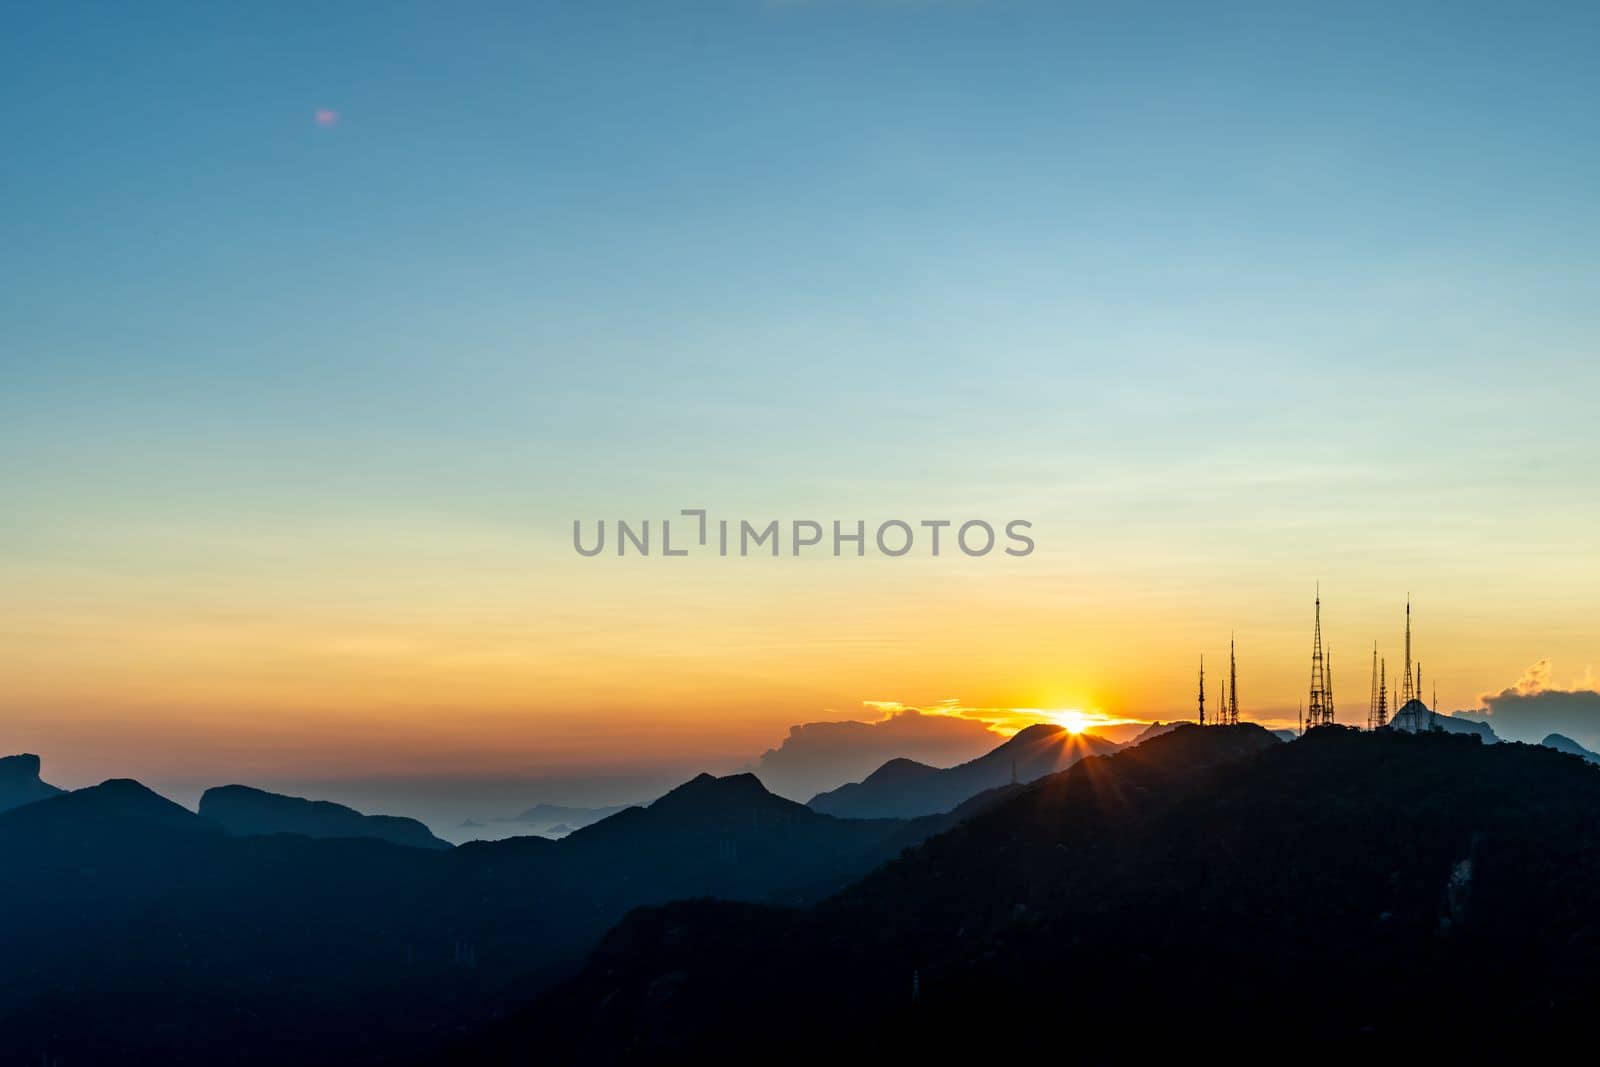 sunset over the transmission towers in rio de janeiro, view from the statue of christ.